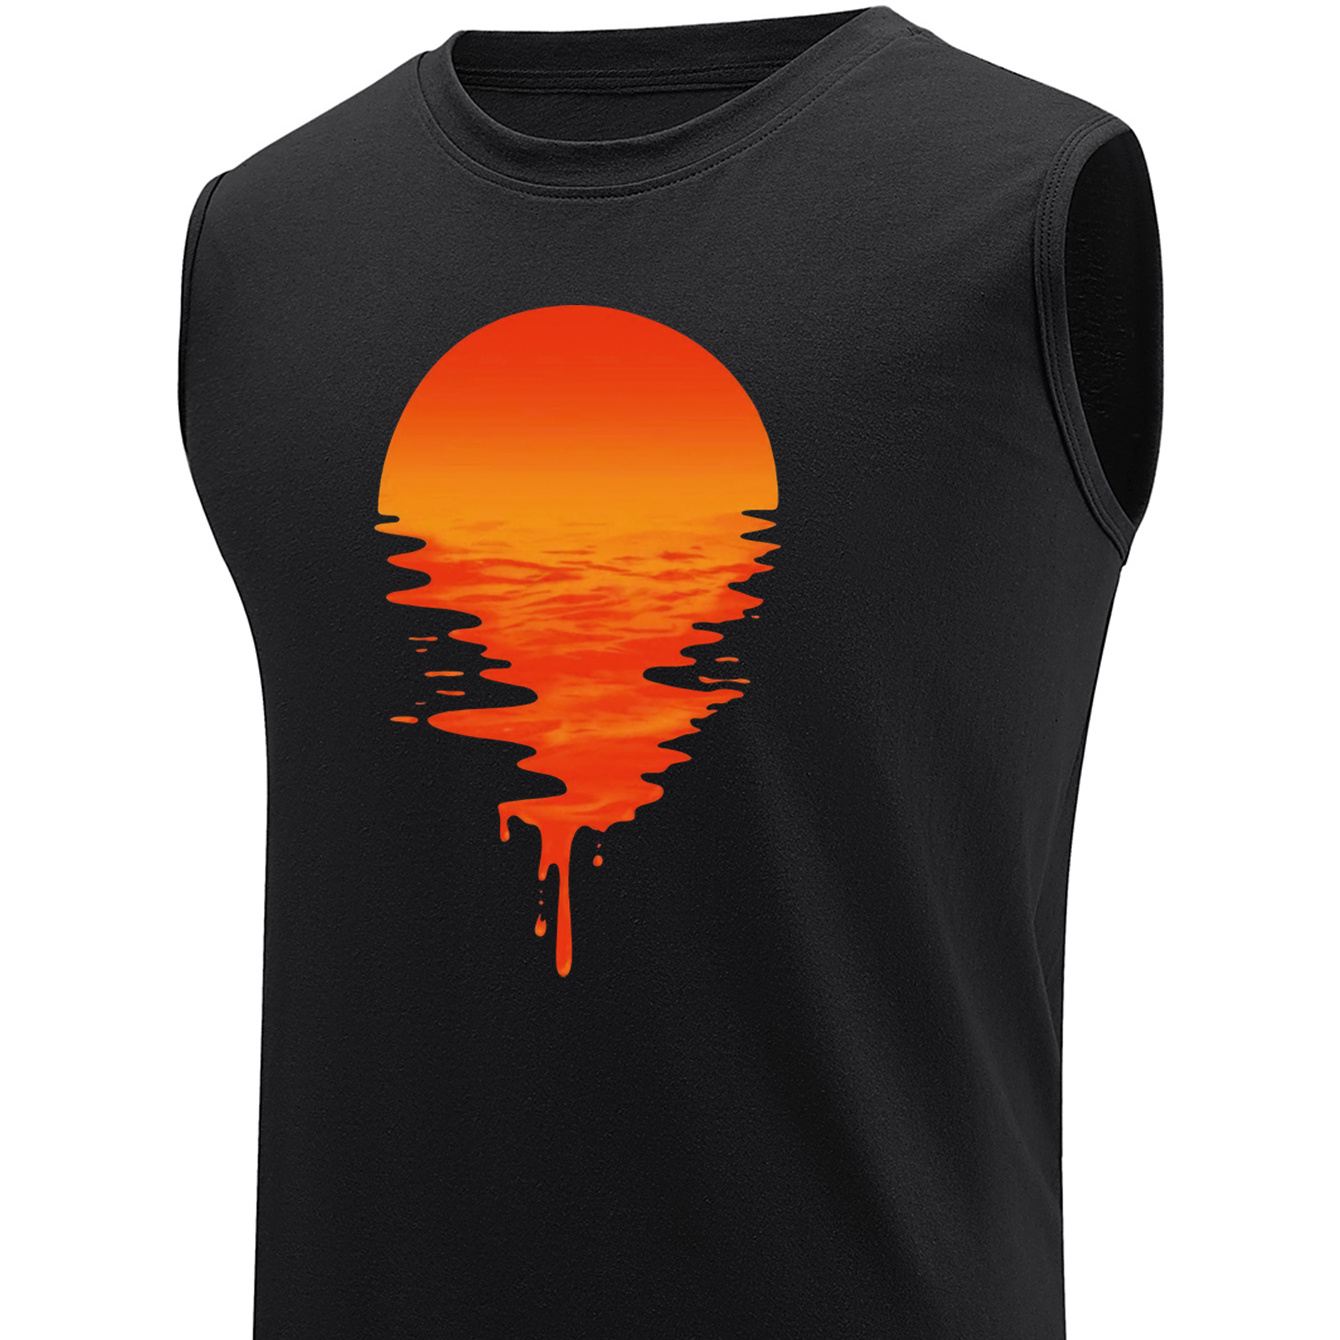 

Plus Size Men's Sunset Graphic Print Tank Top, Breathable Sleeveless Tees For Sports/fitness